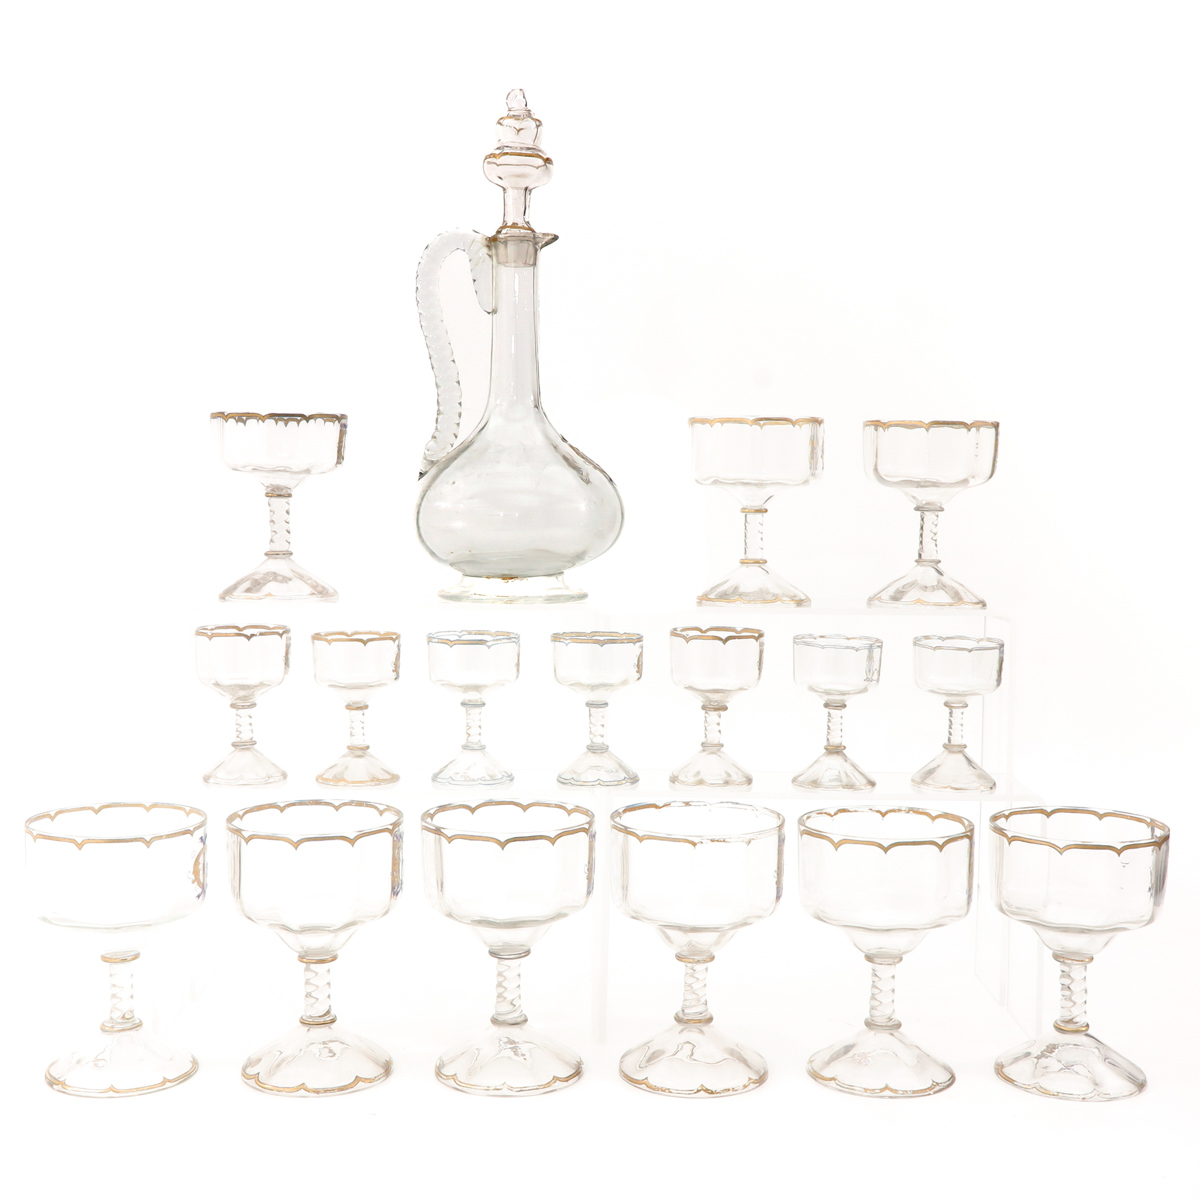 An Extremely Rare Set of Glassware - Image 4 of 10